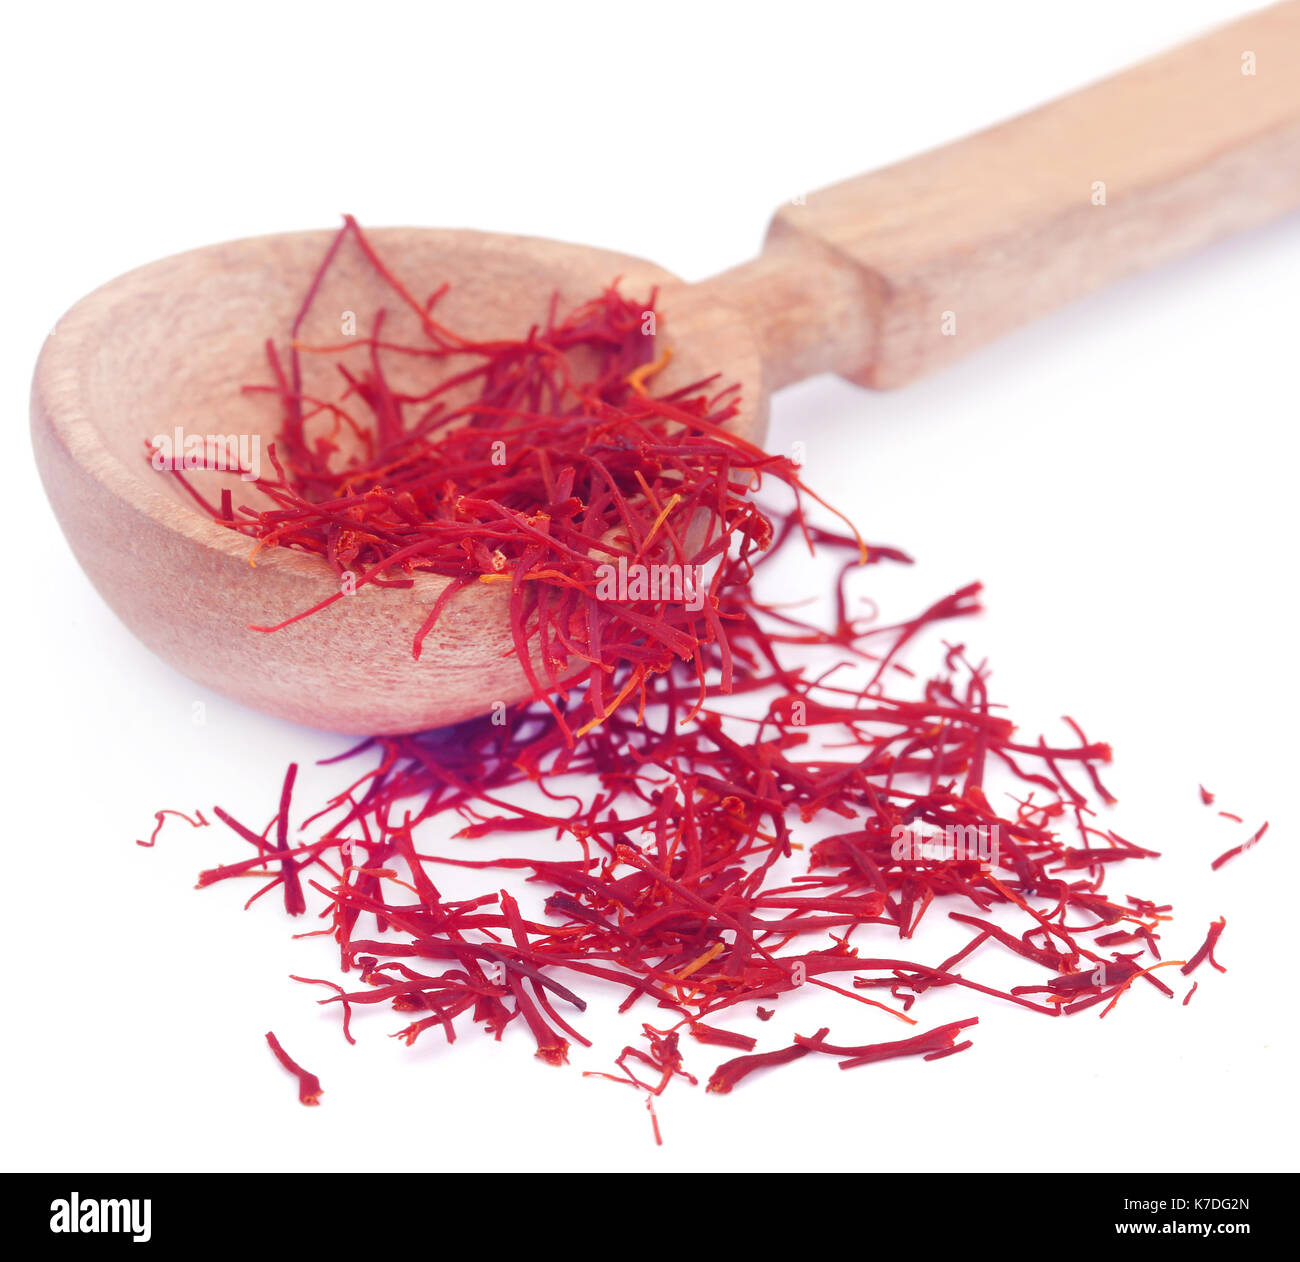 Closeup of Saffron used as food additive over white background Stock Photo